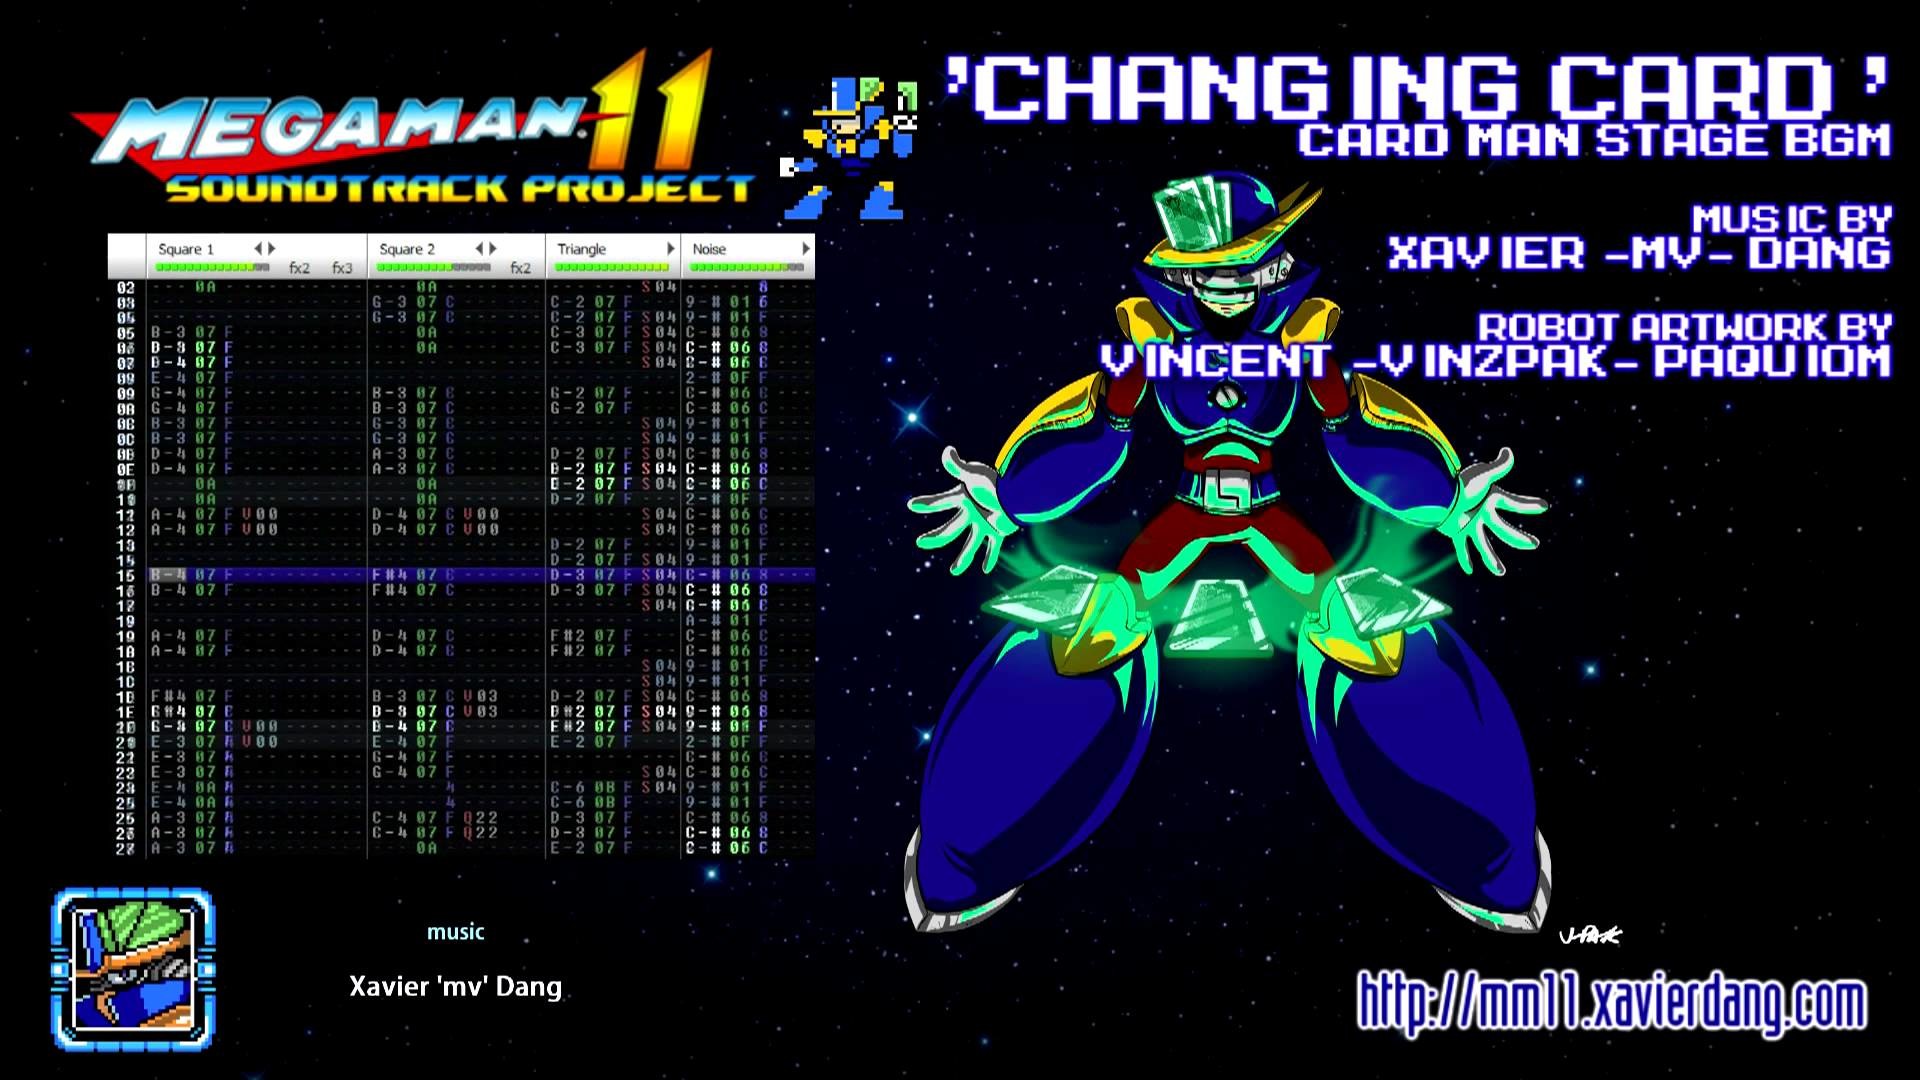 1920x1080 CHANGING CARD (CARD MAN STAGE) -- MEGA MAN 11 soundtrack project